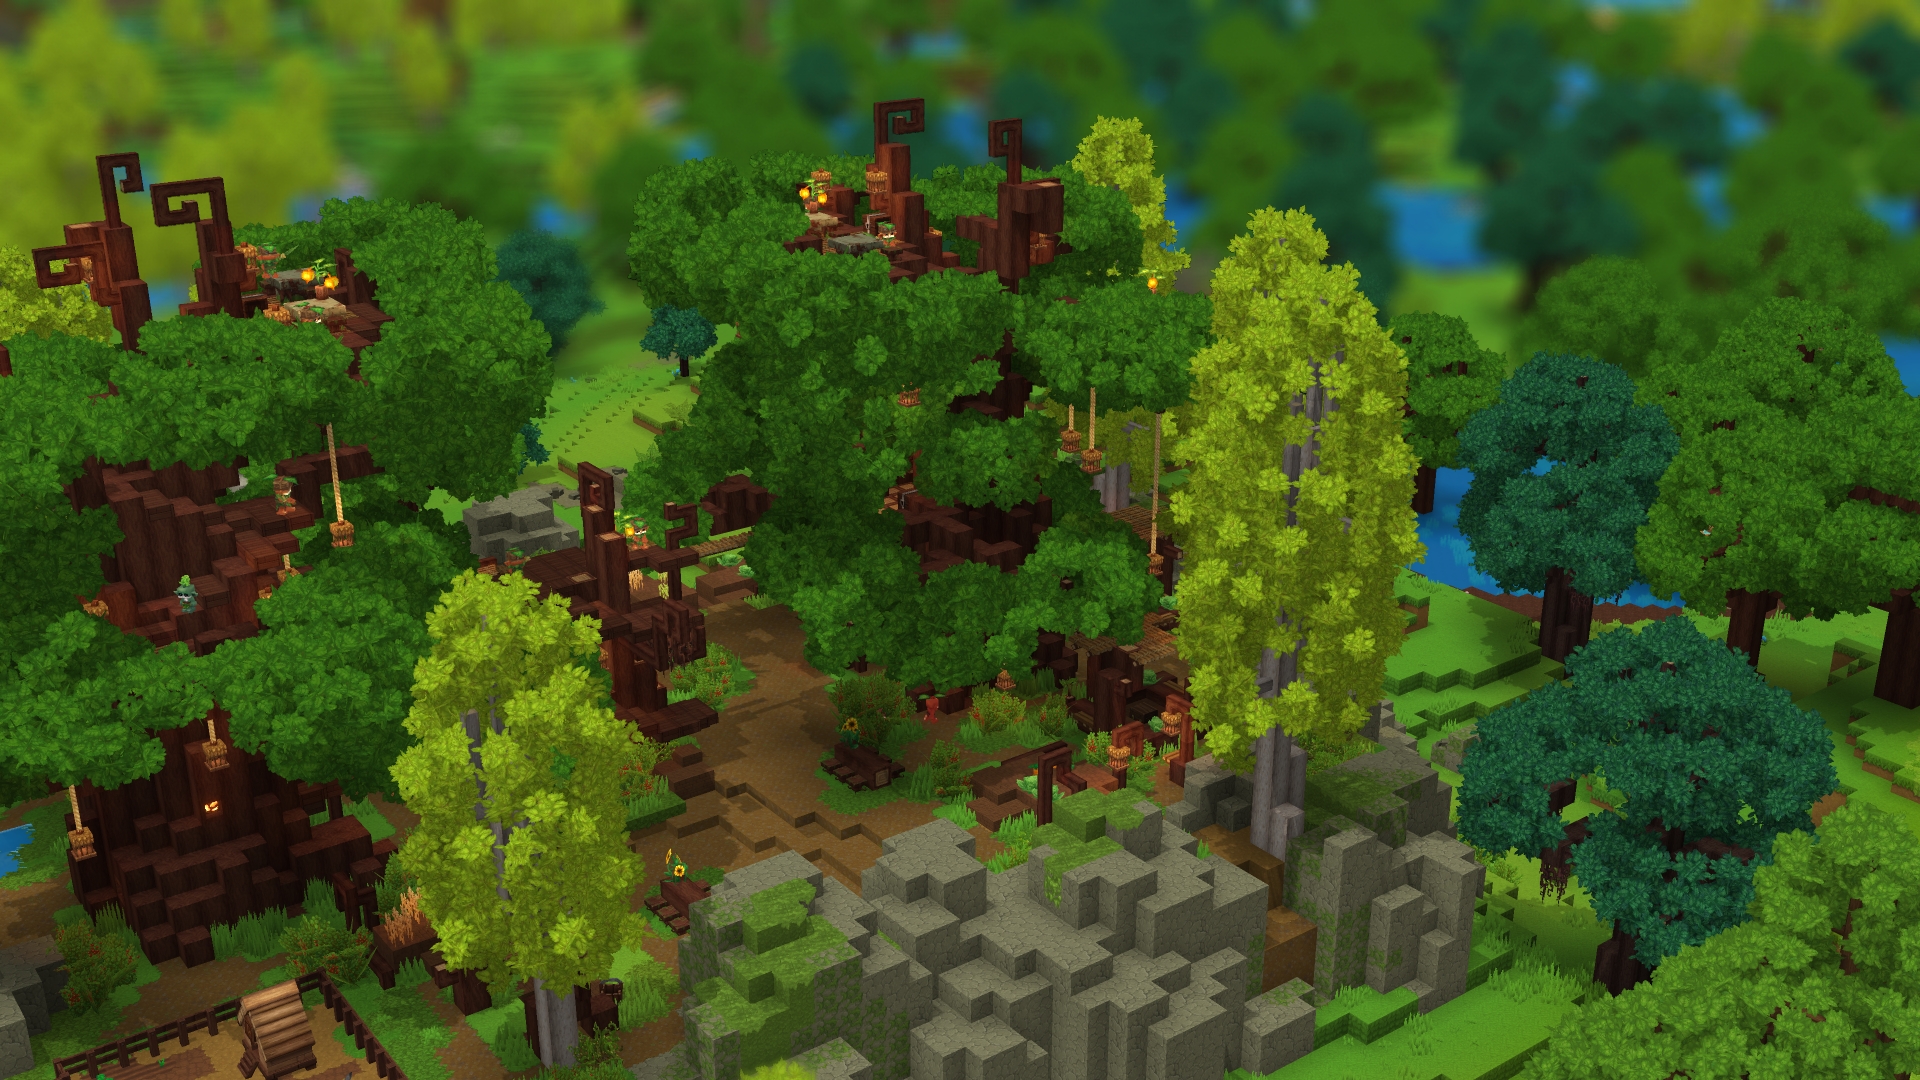 An in-development image of blocky RPG Hytale from July 2021.